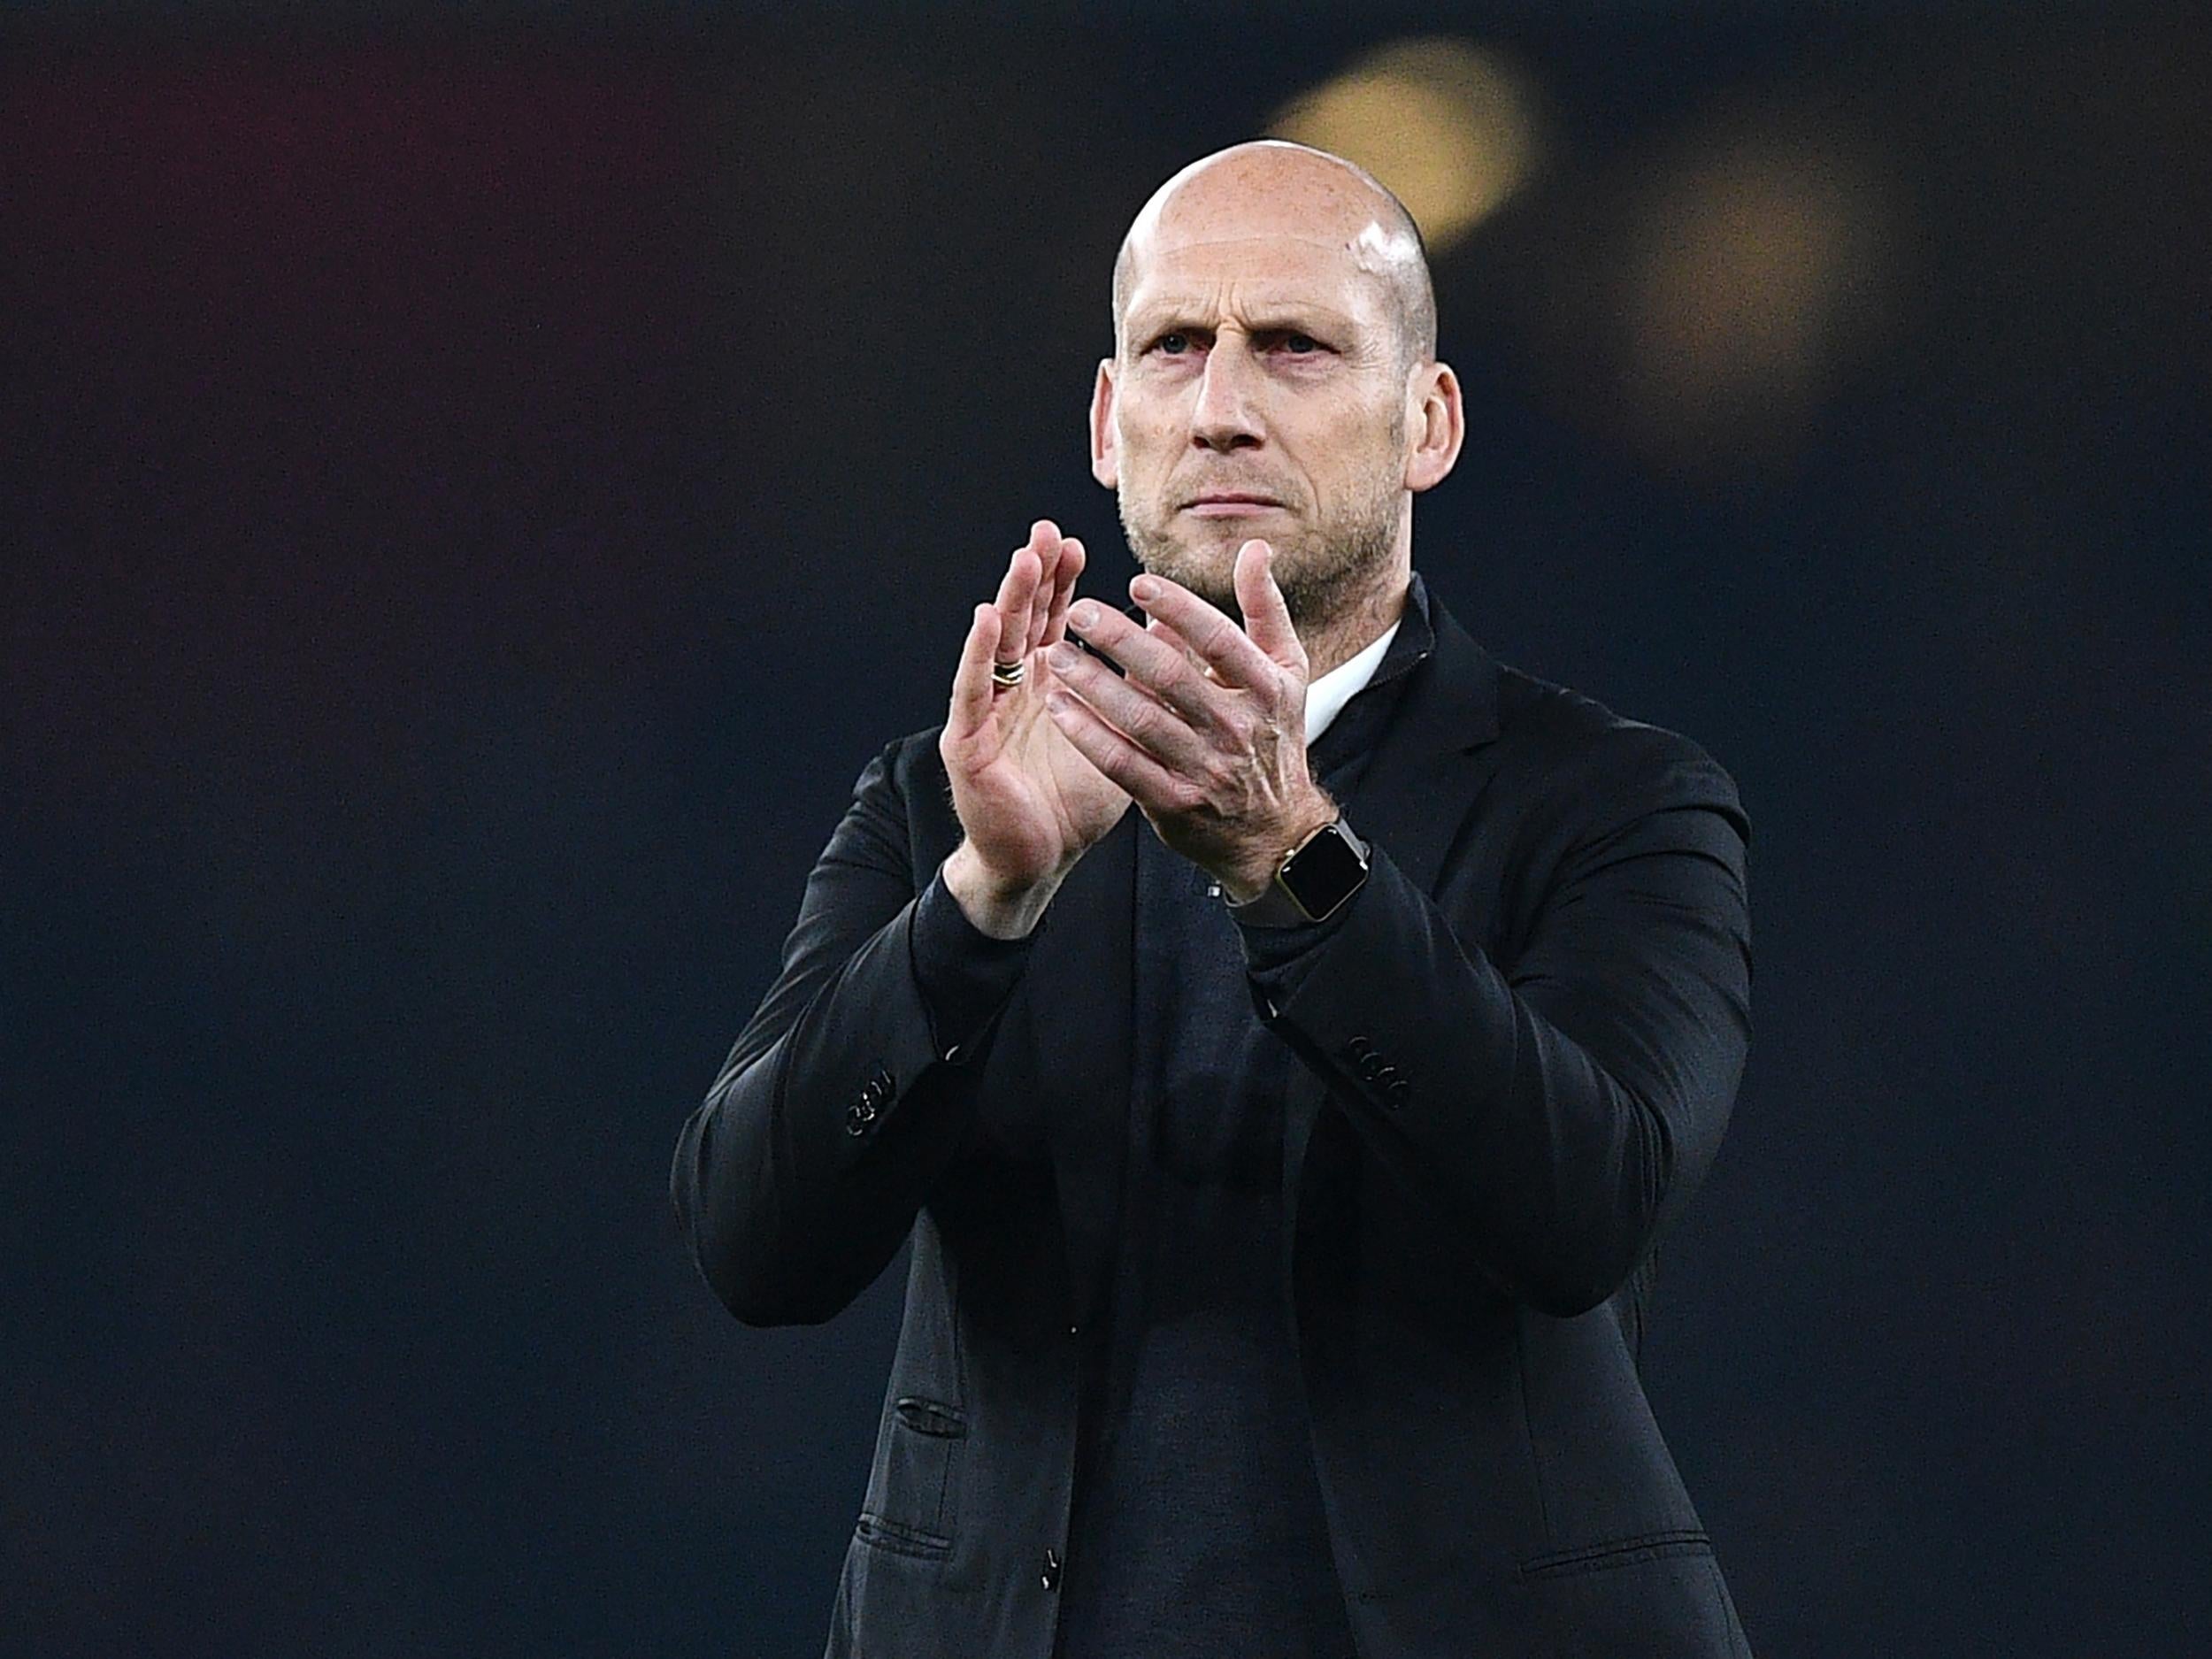 Stam will return to Old Trafford for the first time as a manager